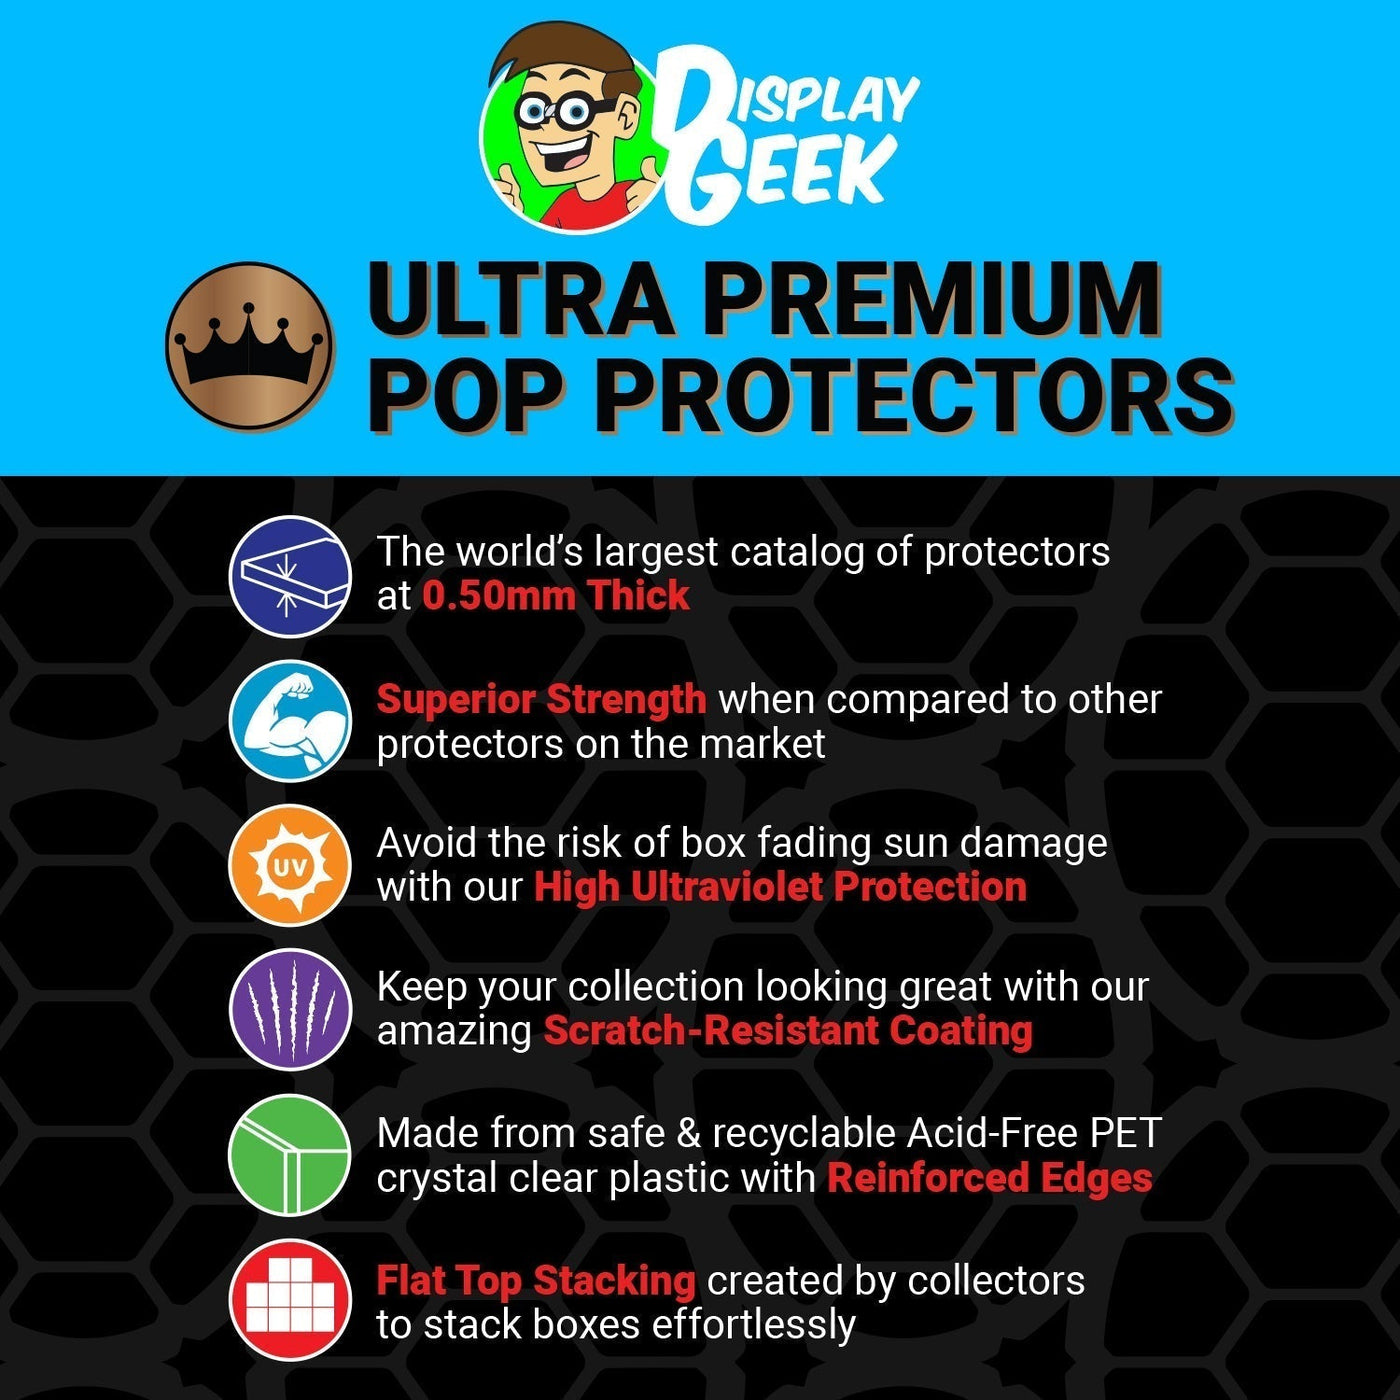 Pop Protector for Pickle Rick FunkO's Cereal Box on The Protector Guide App by Display Geek